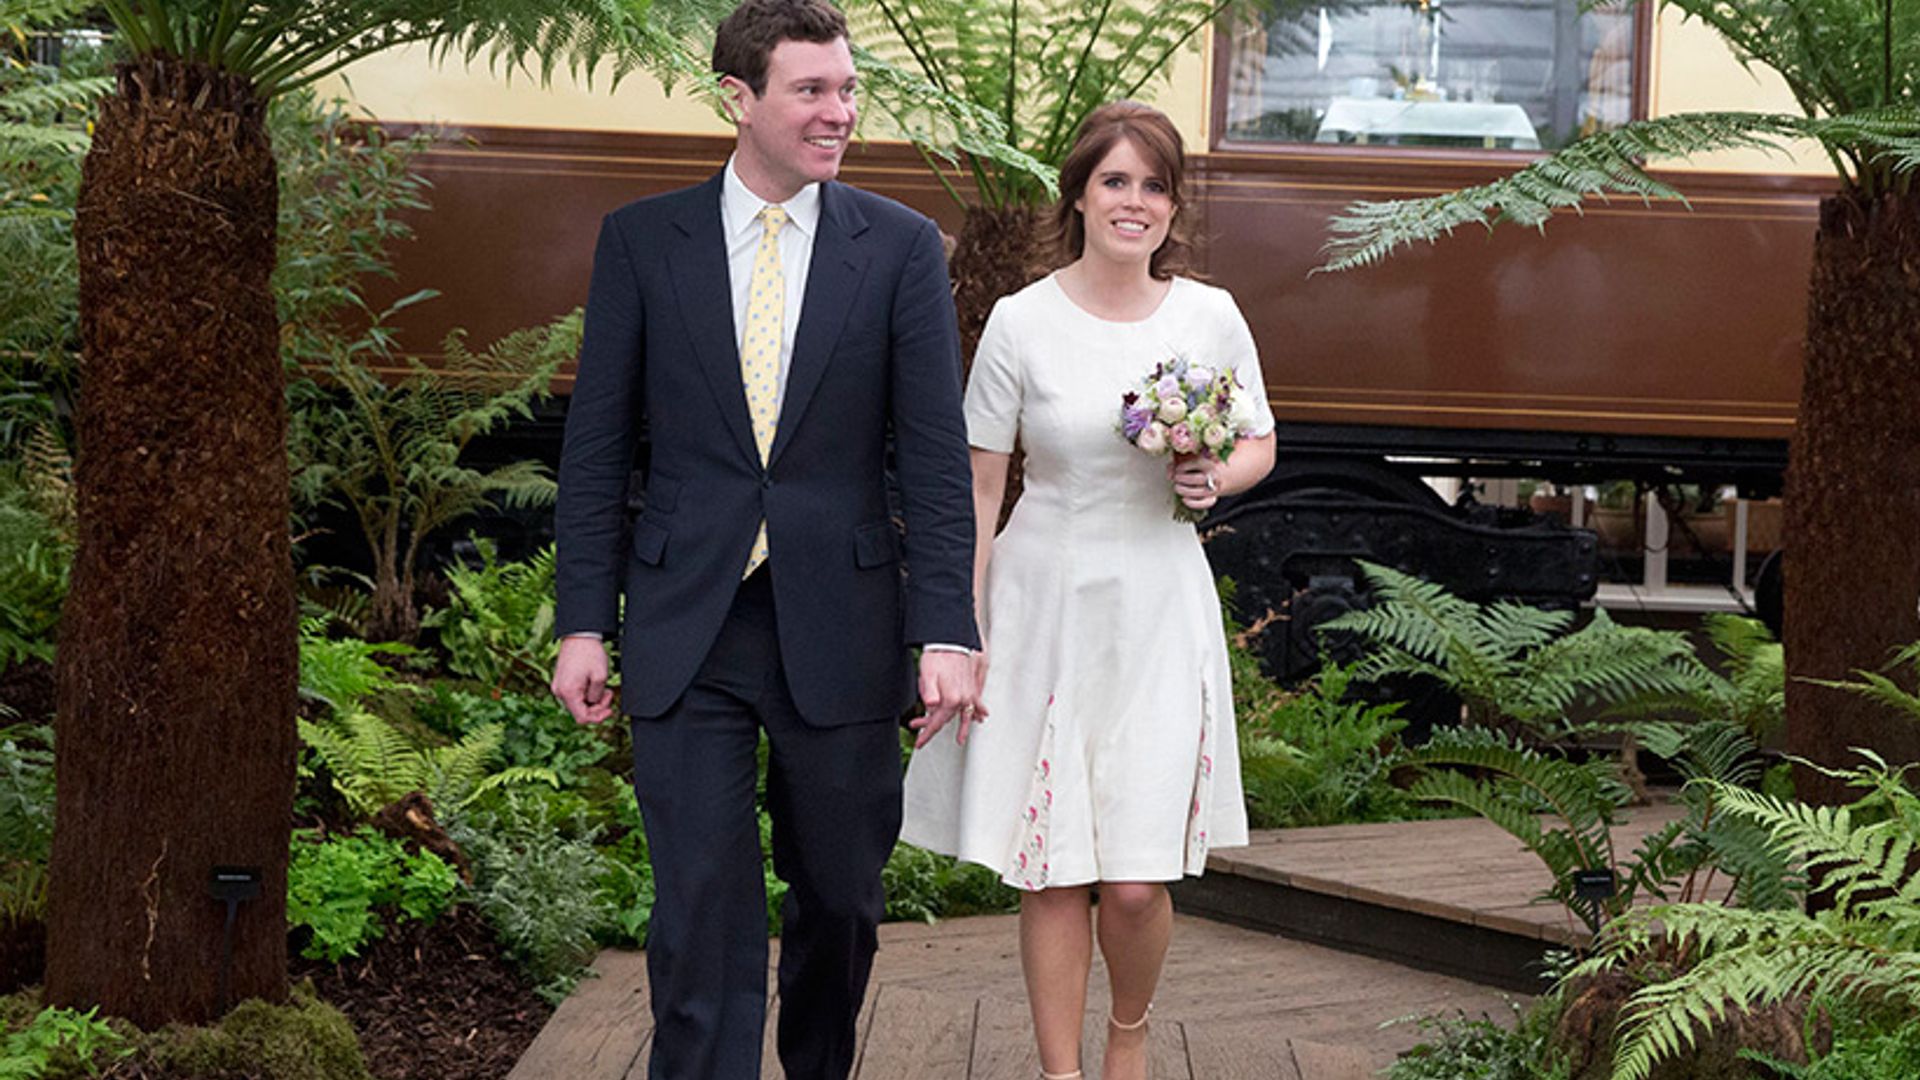 Princess Eugenie and Jack Brooksbank party in London following those engagement rumours